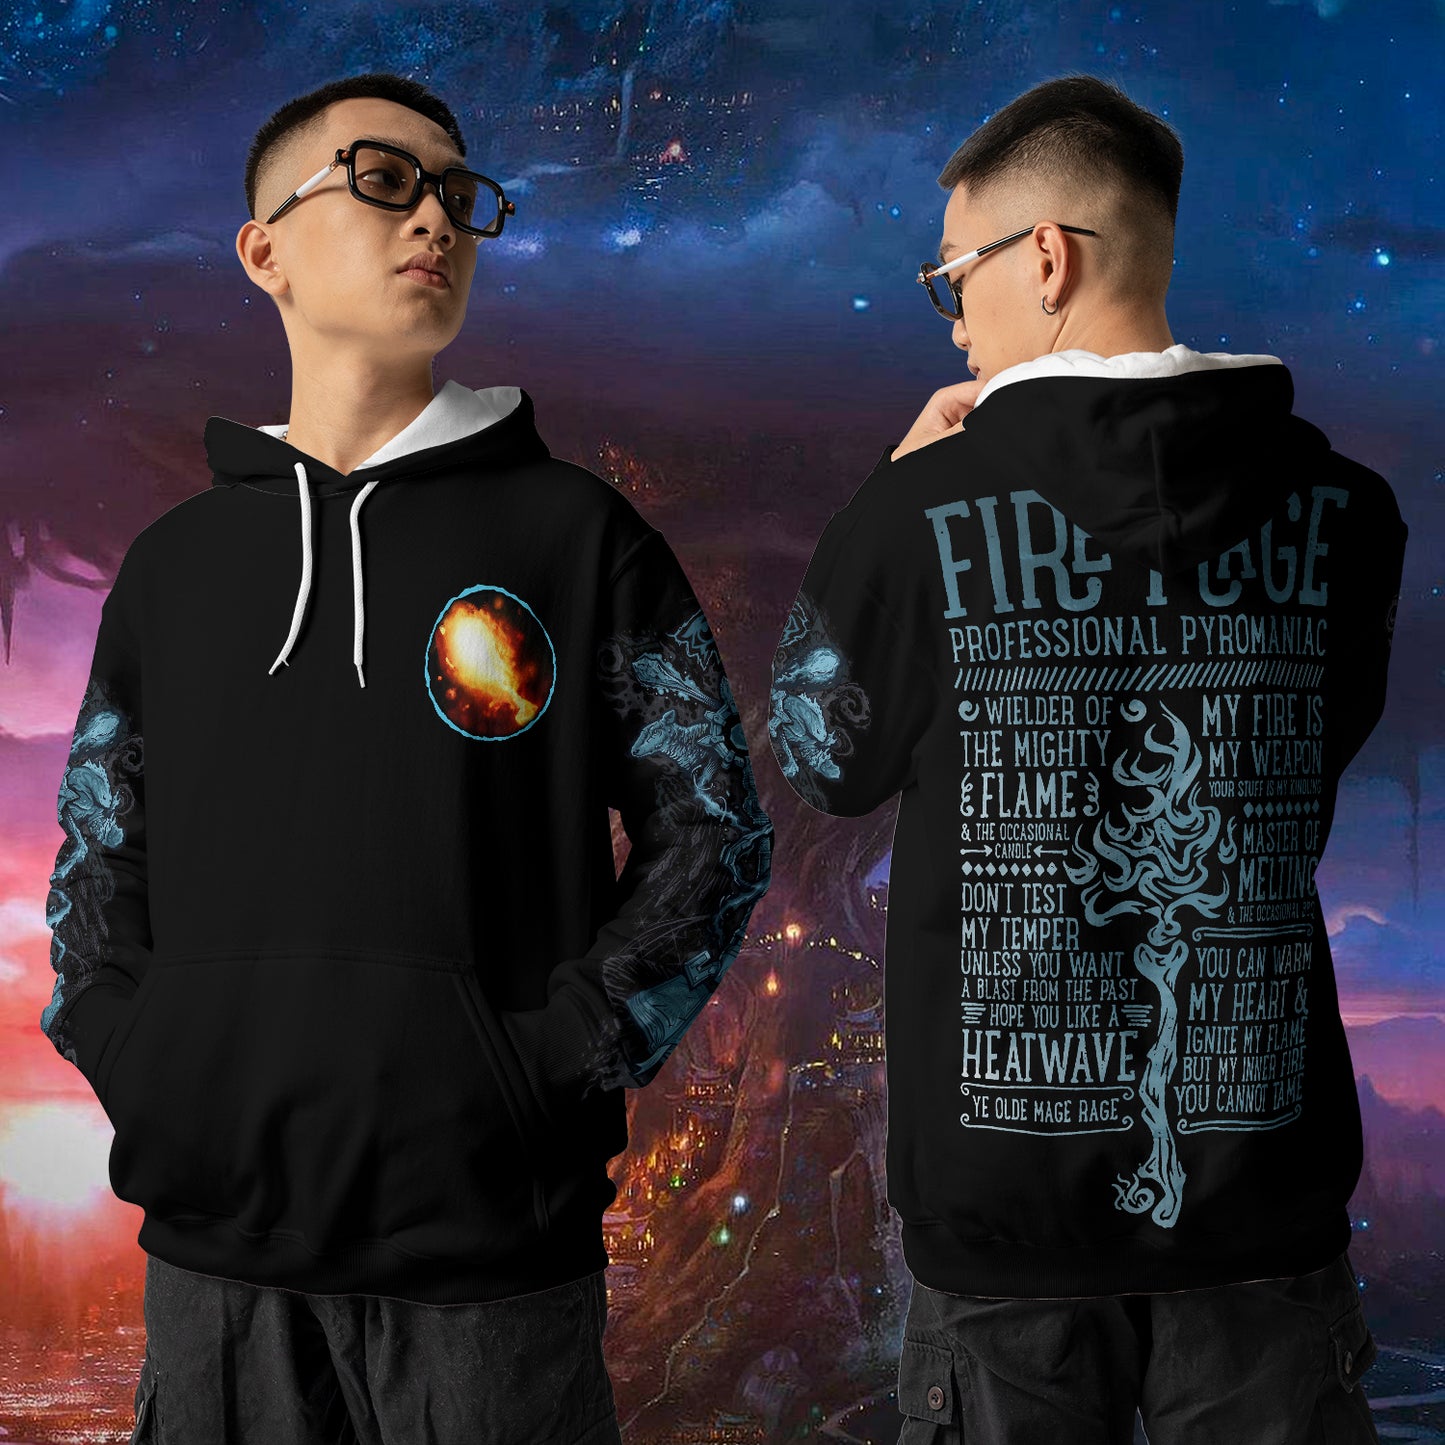 Fire Mage - WoW Class Guide V3 - All-over Print Hoodie